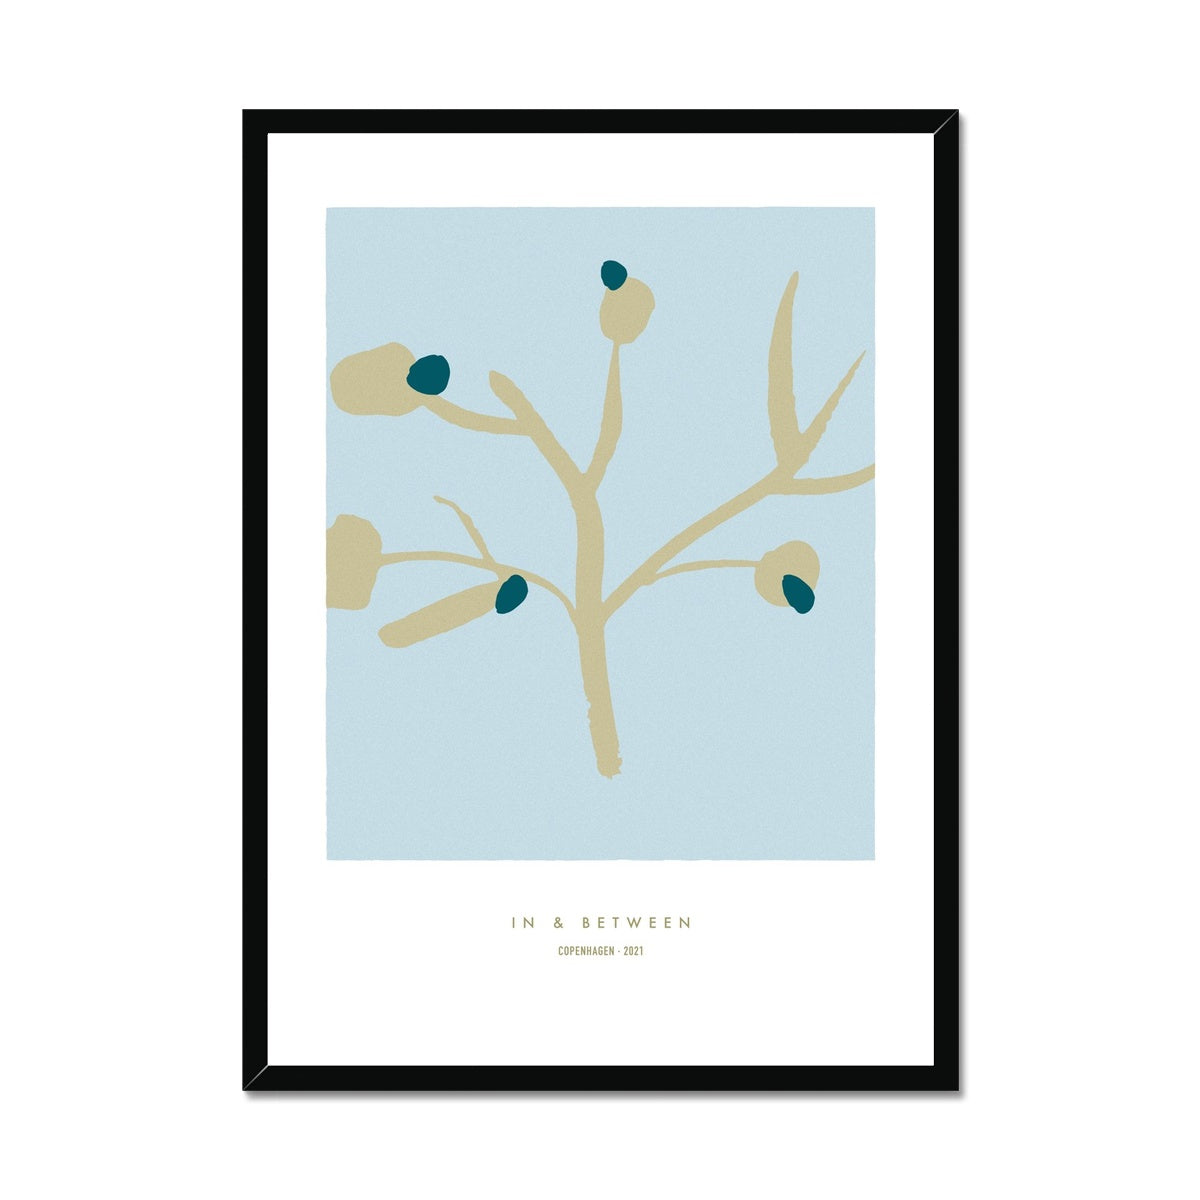 Upright golden olive tree branch with dark green olives on a light blue background in a black wooden frame.